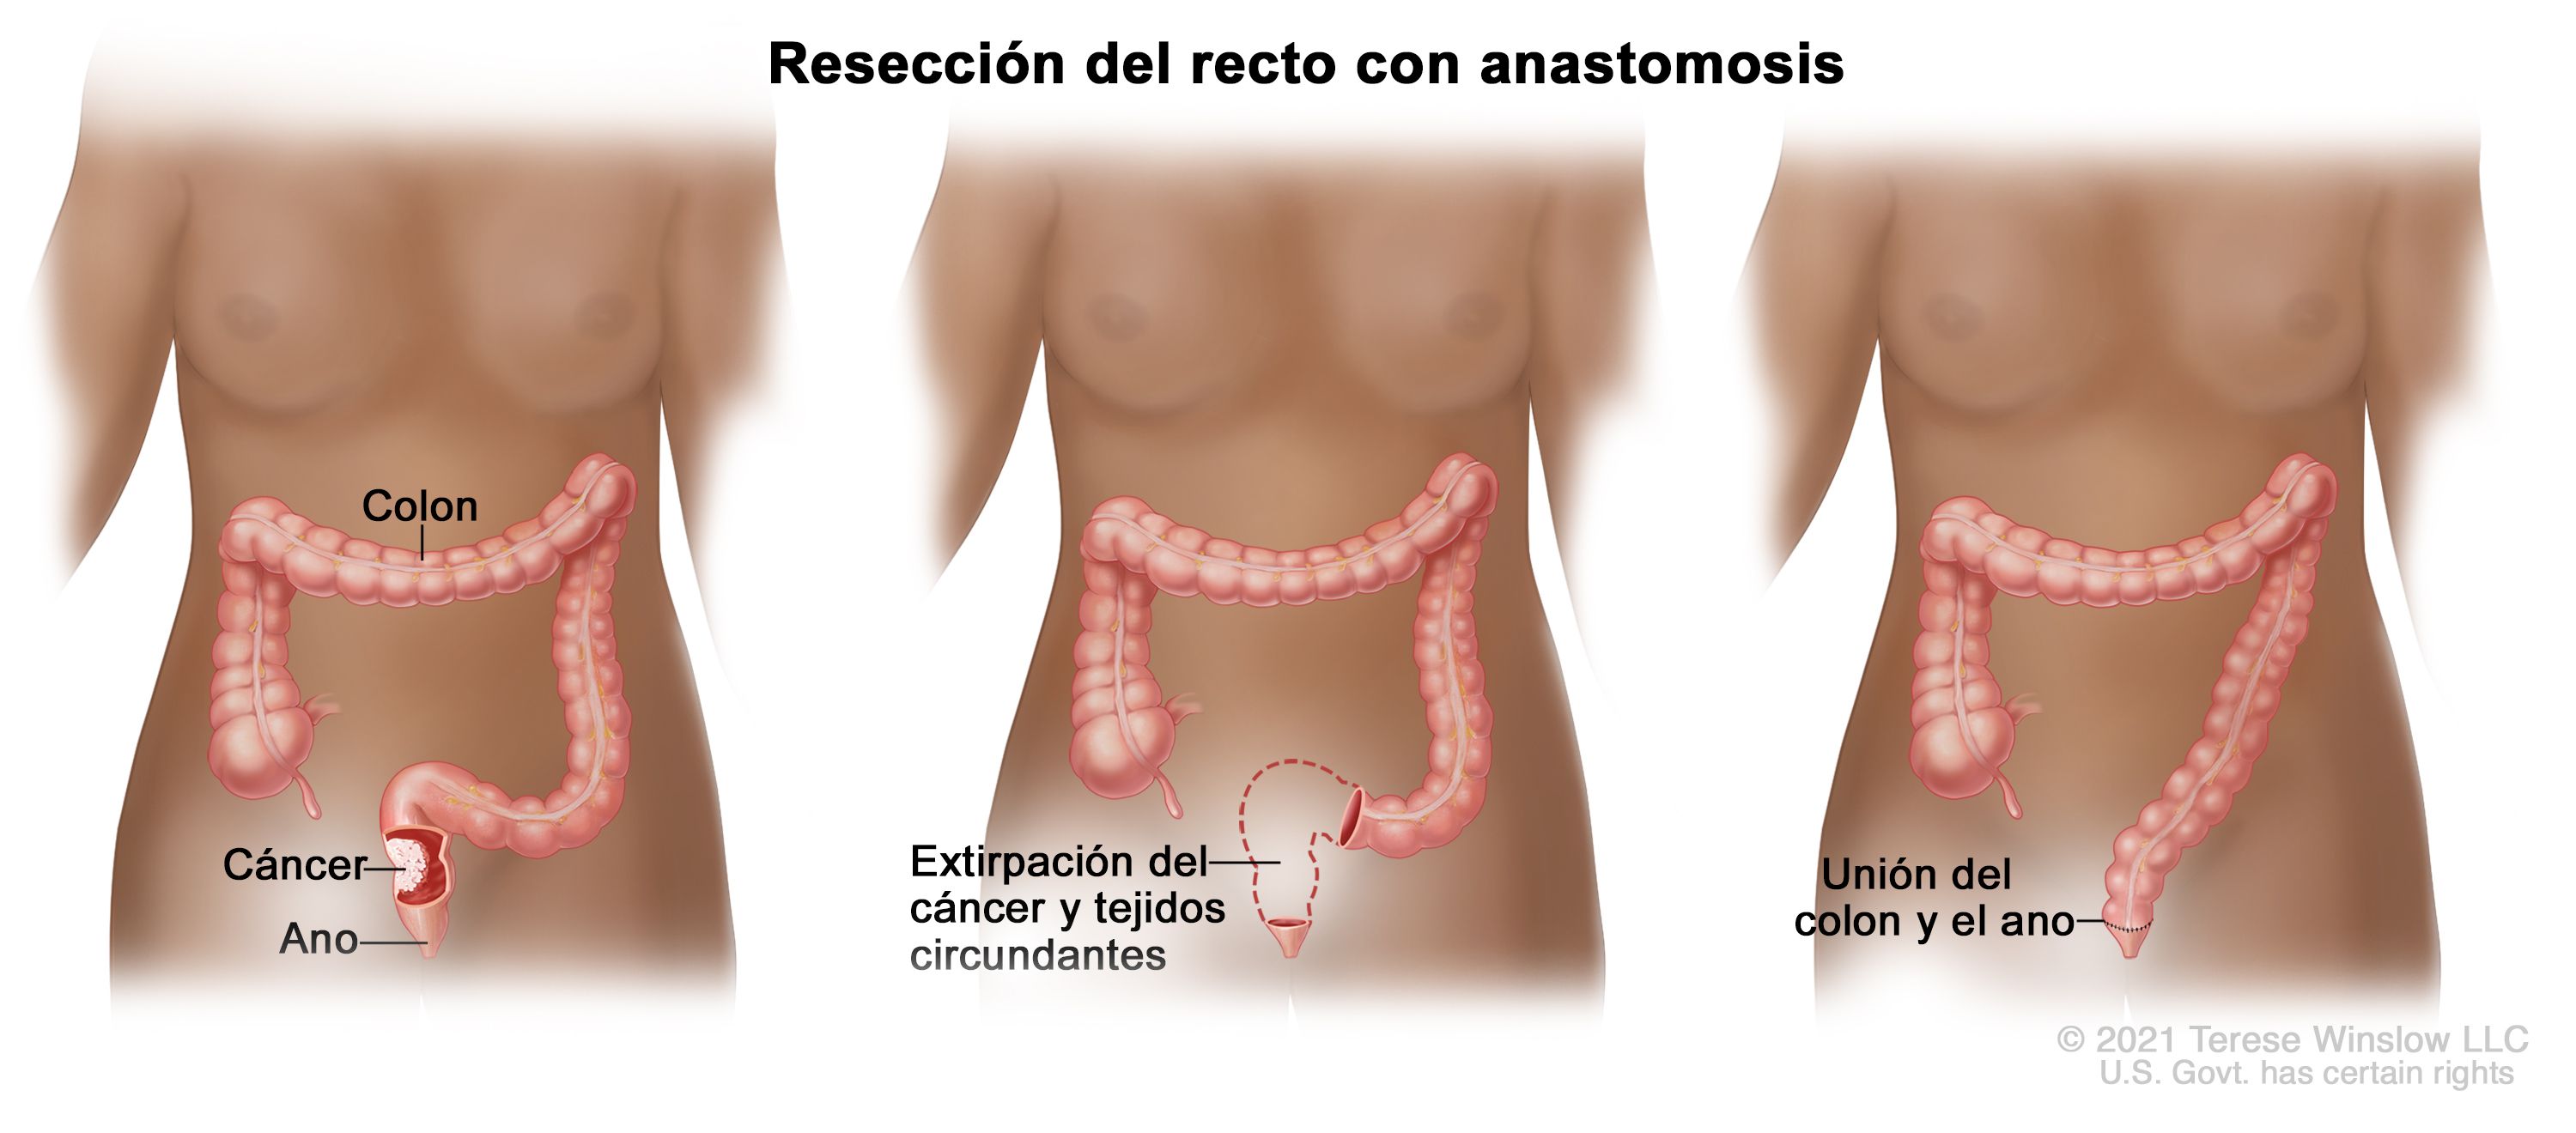 cancer rectal tratamiento)